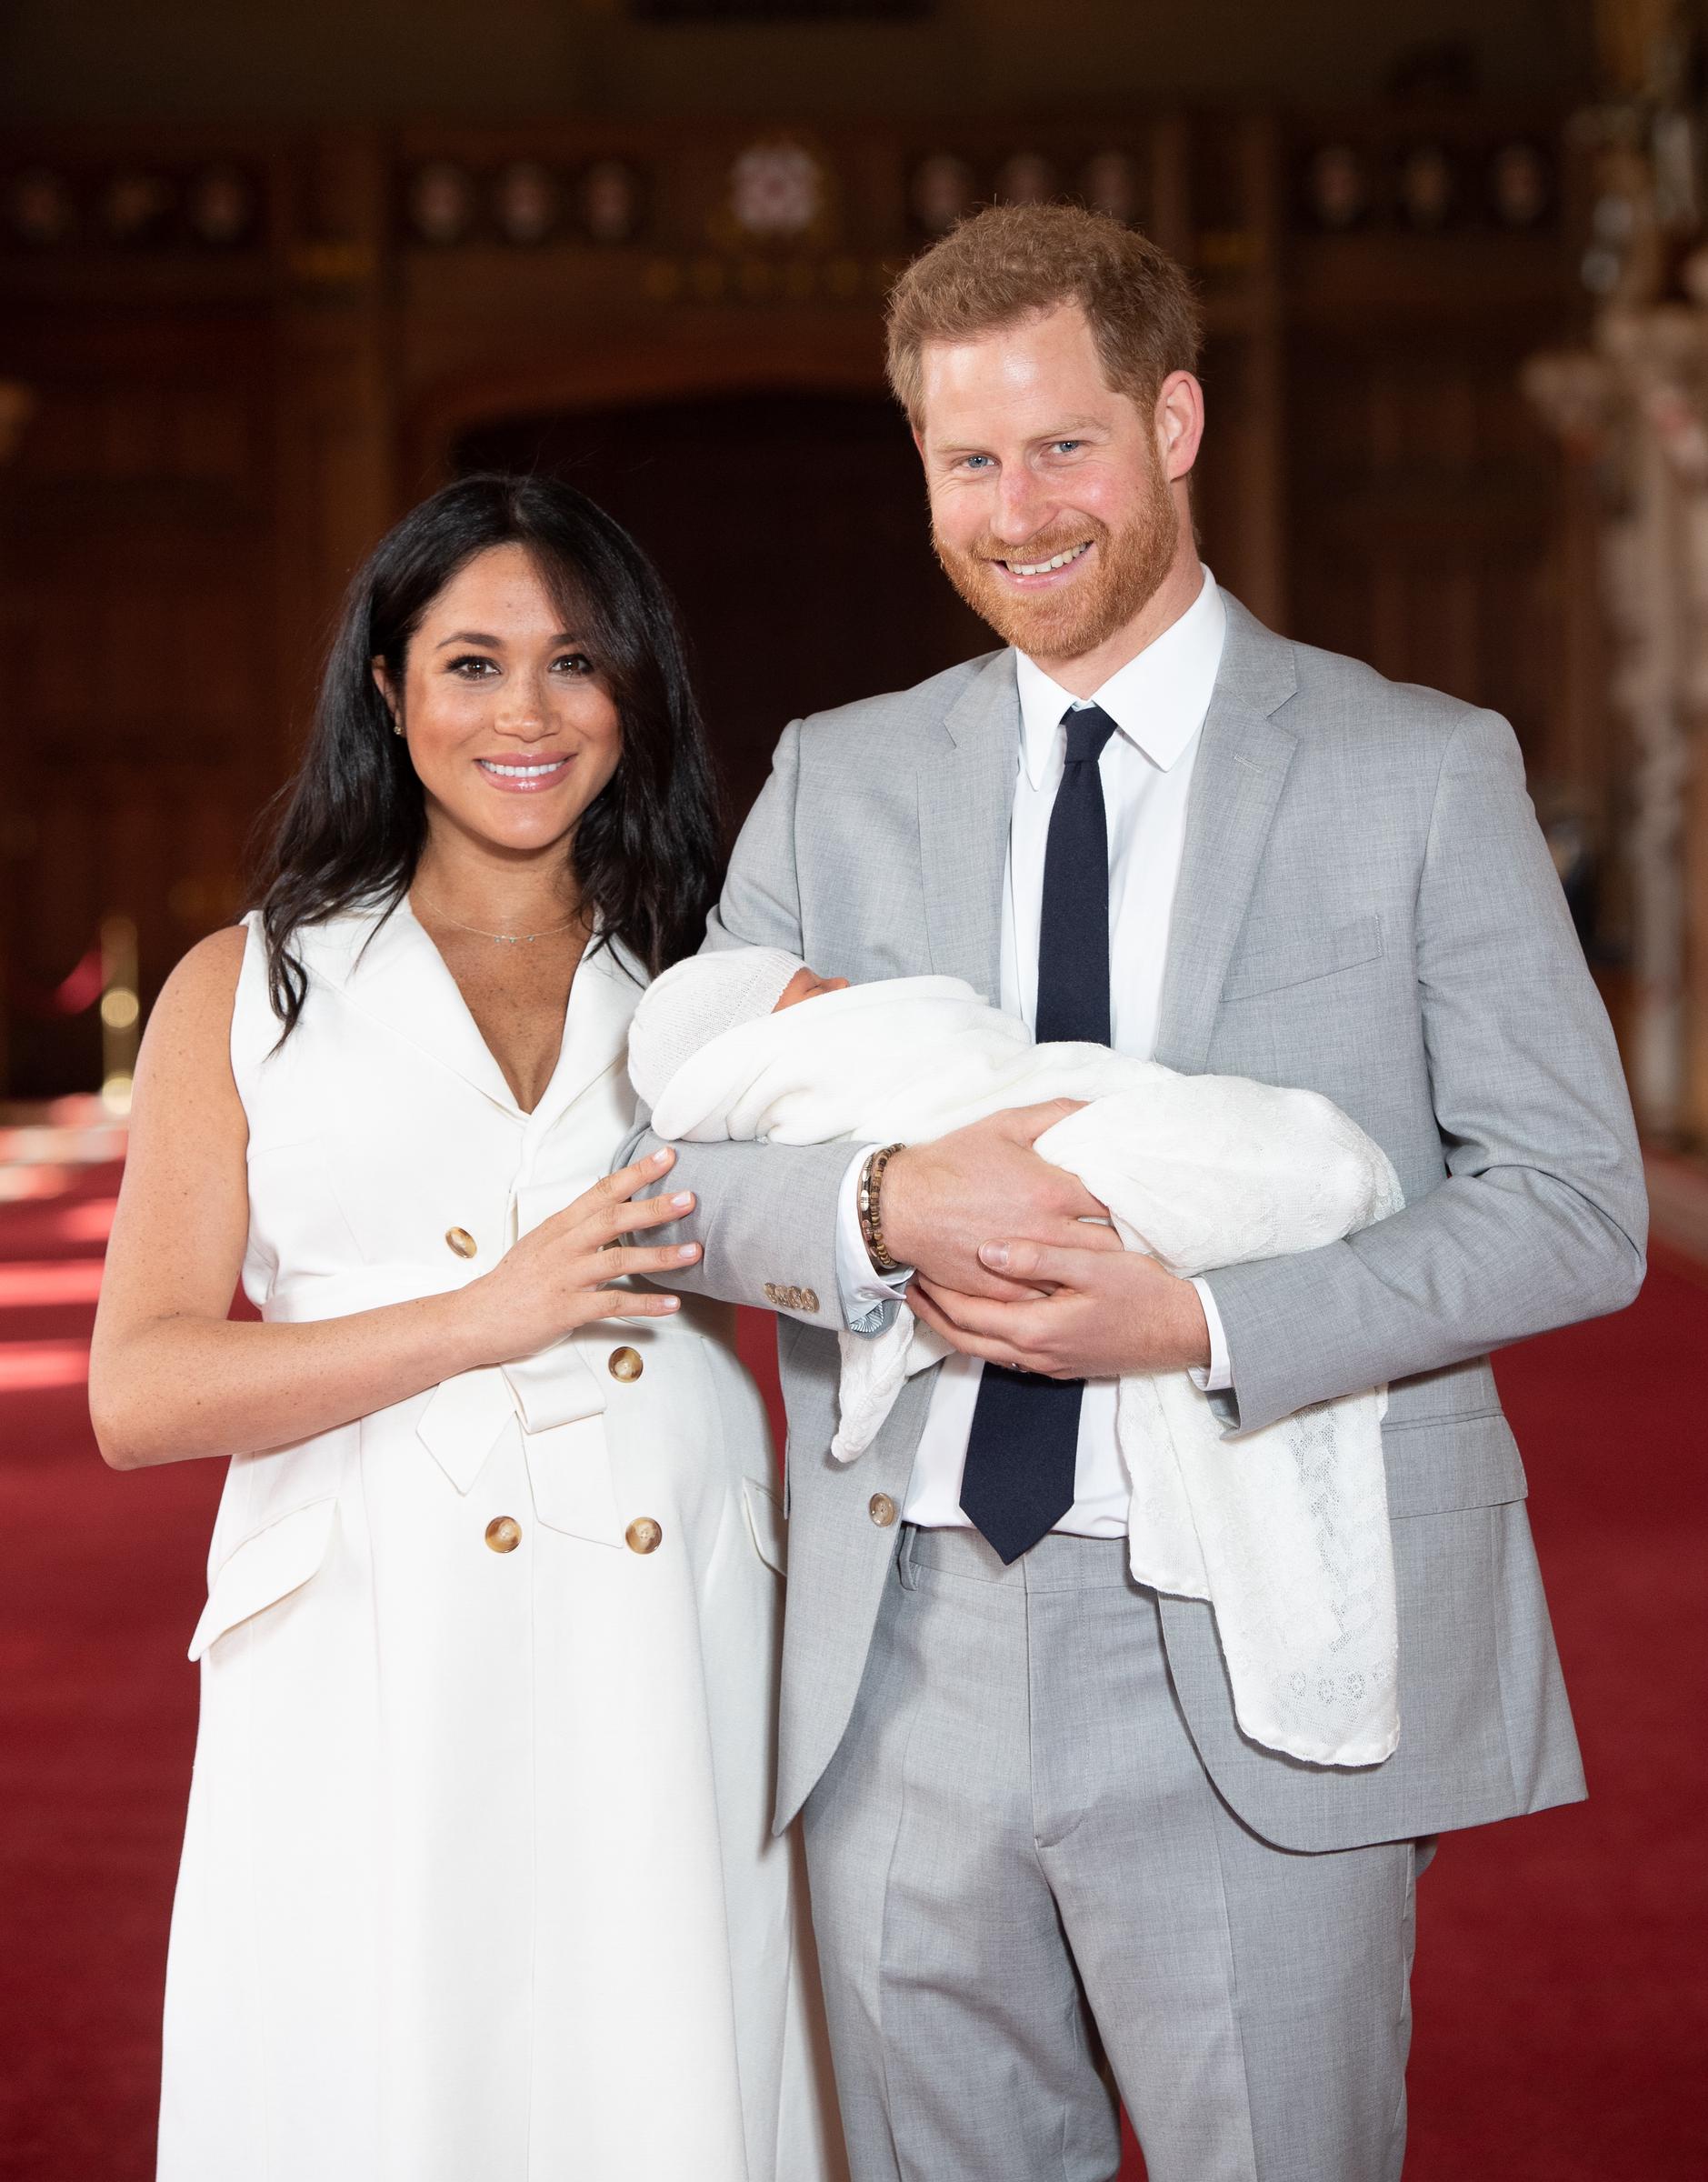 Prince Harry and Meghan Markle pose with their newborn son, Archie Harrison Mountbatten-Windsor, during a photocall in St George's Hall at Windsor Castle on May 8, 2019. | Source: Getty Images